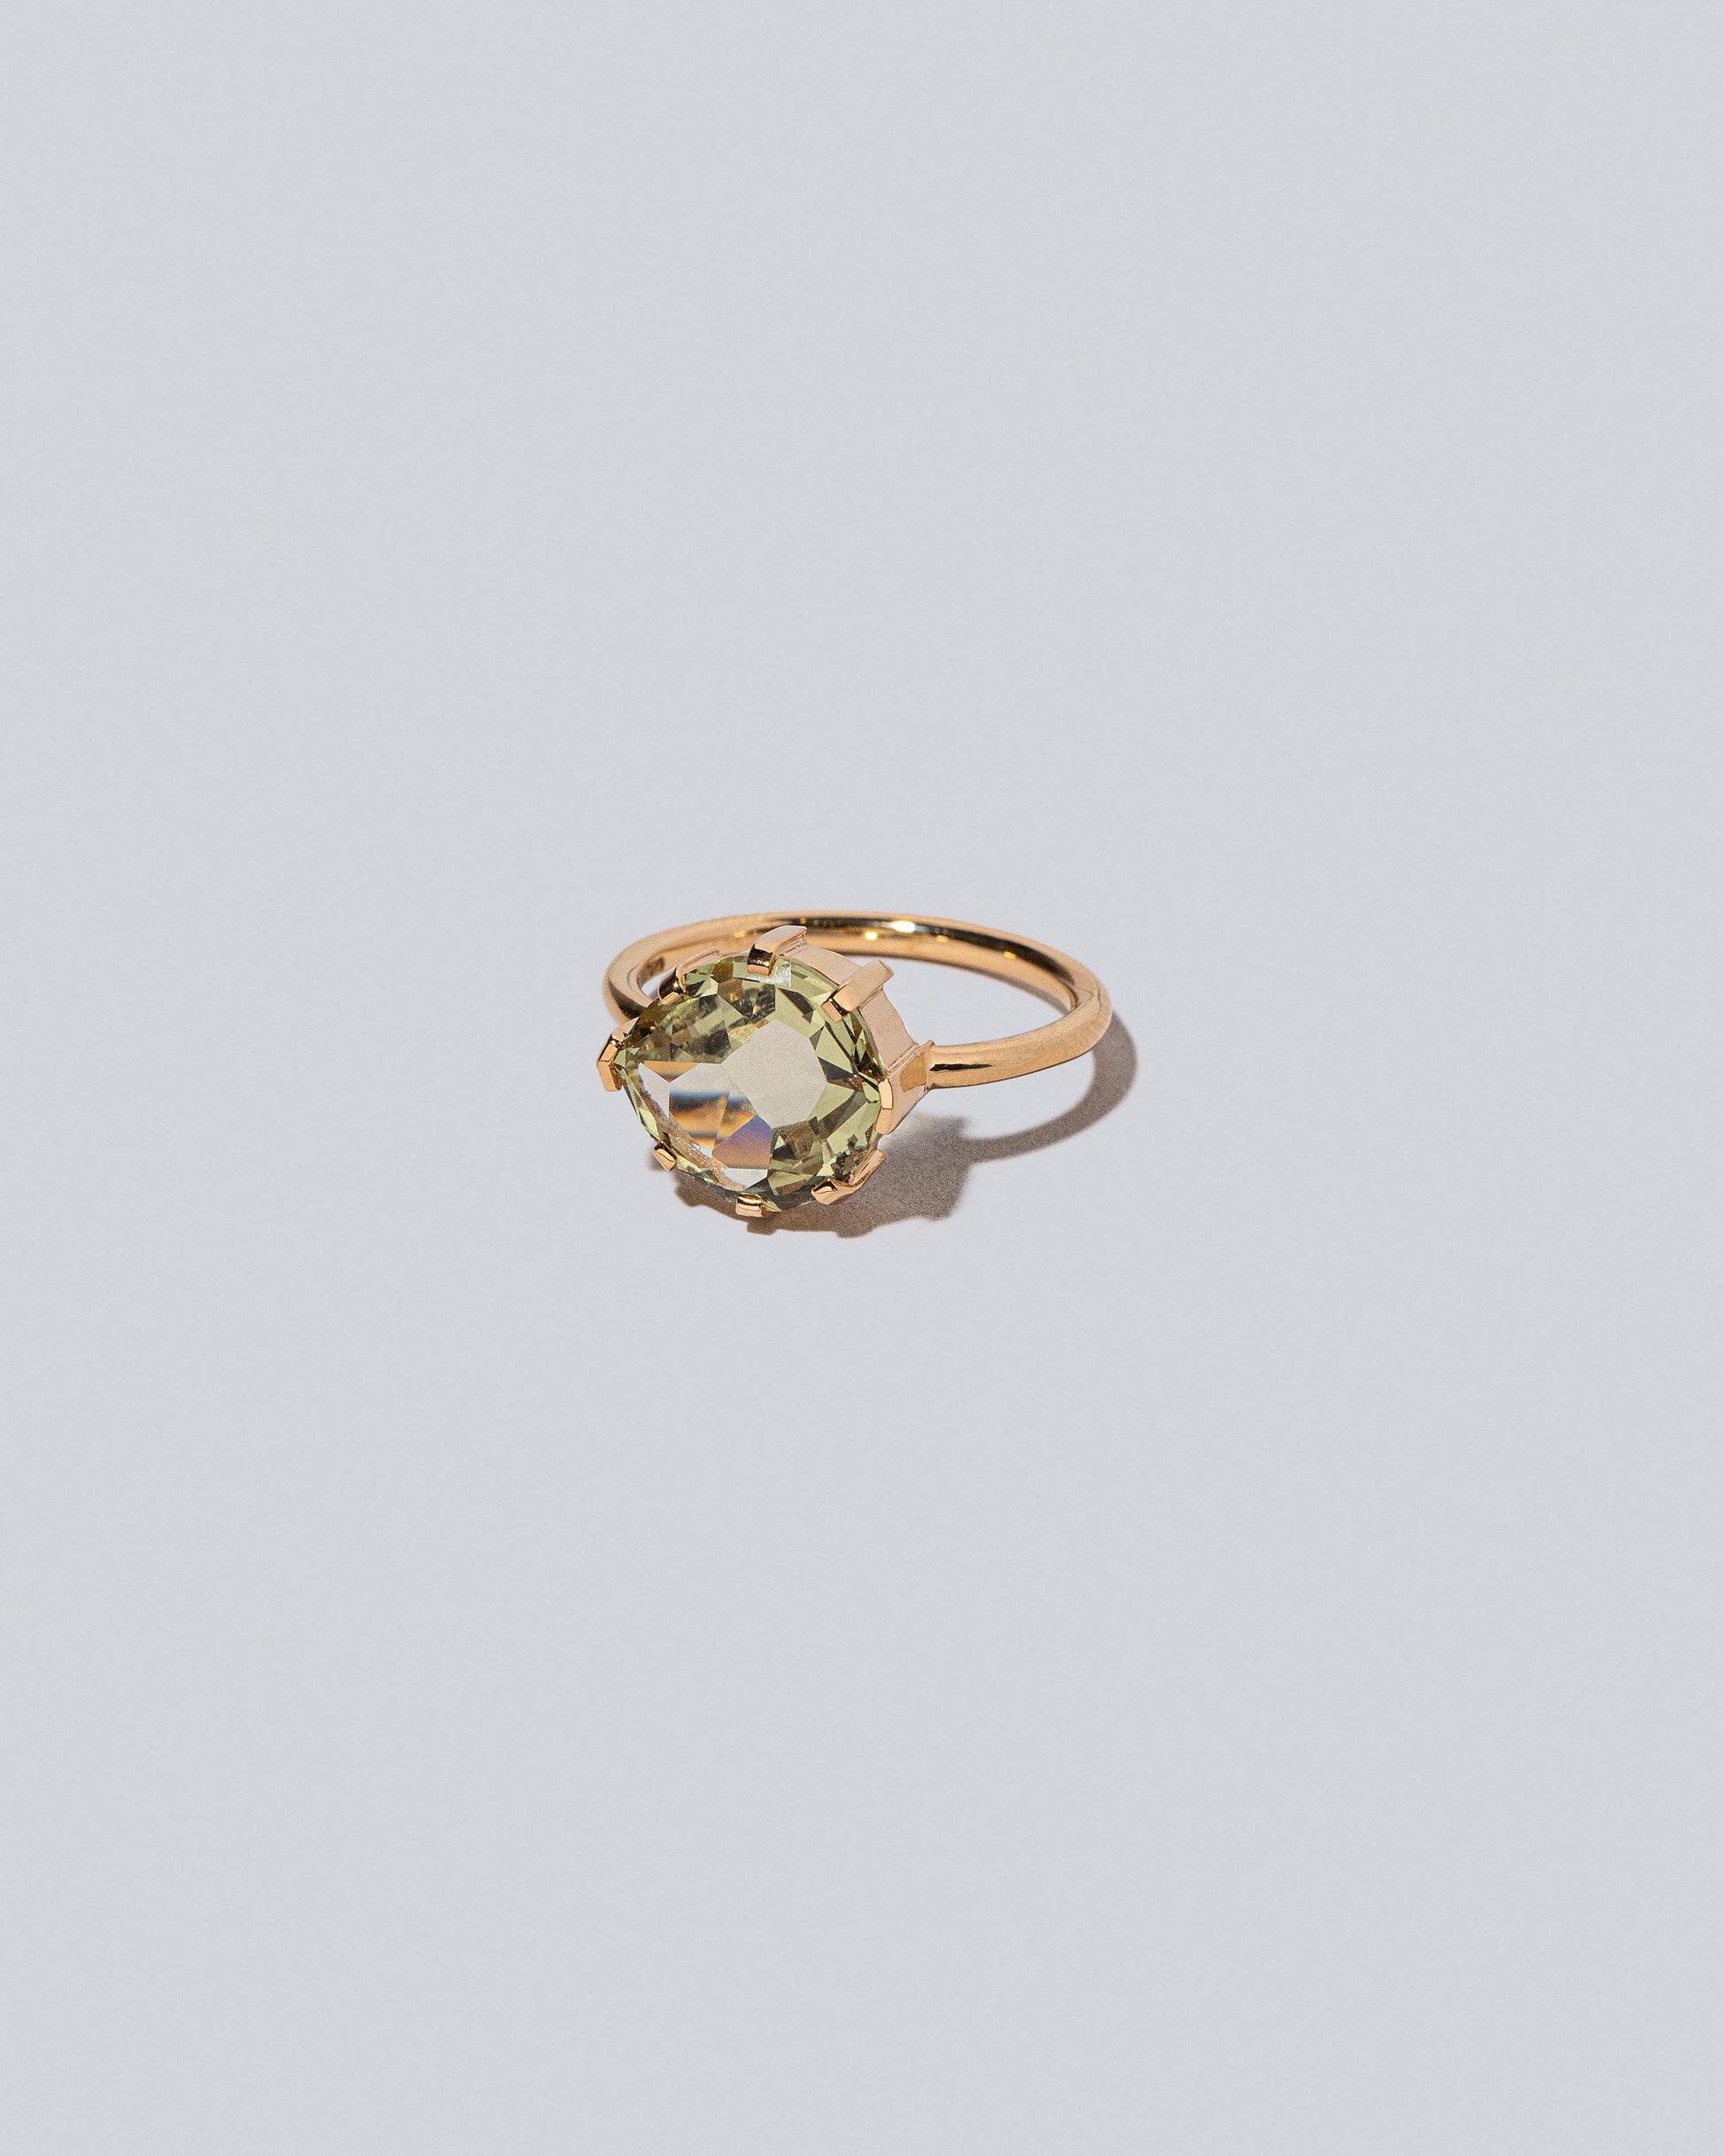 Product photo of the Warbler Ring on a light color background 